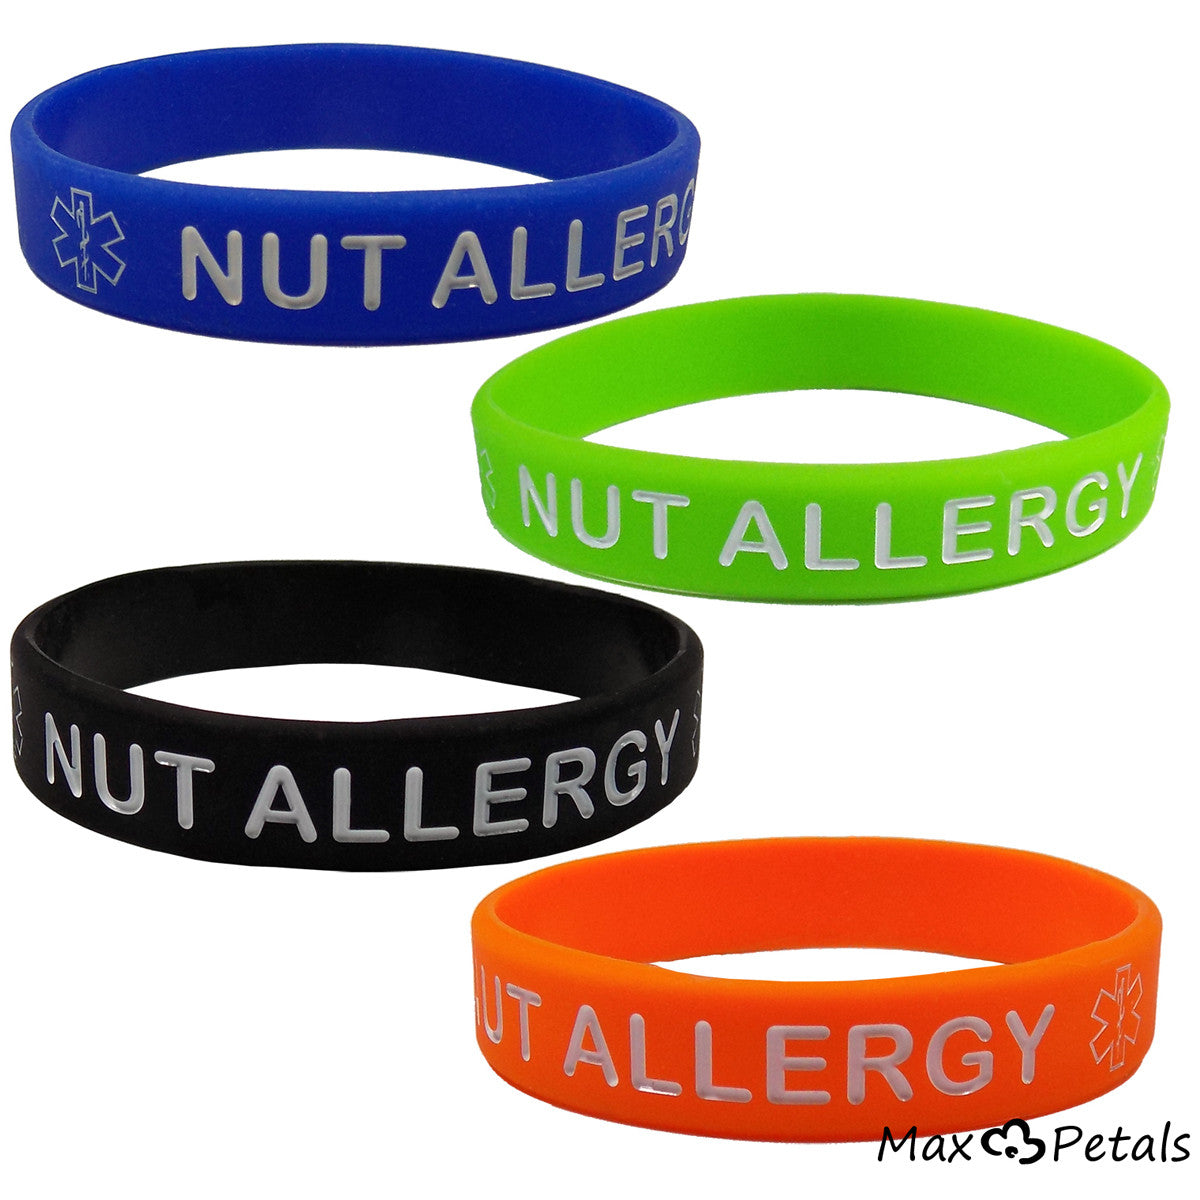 NUT ALLERGY Silicone Wristbands - 7 Inch Kids Size (4 Pack)